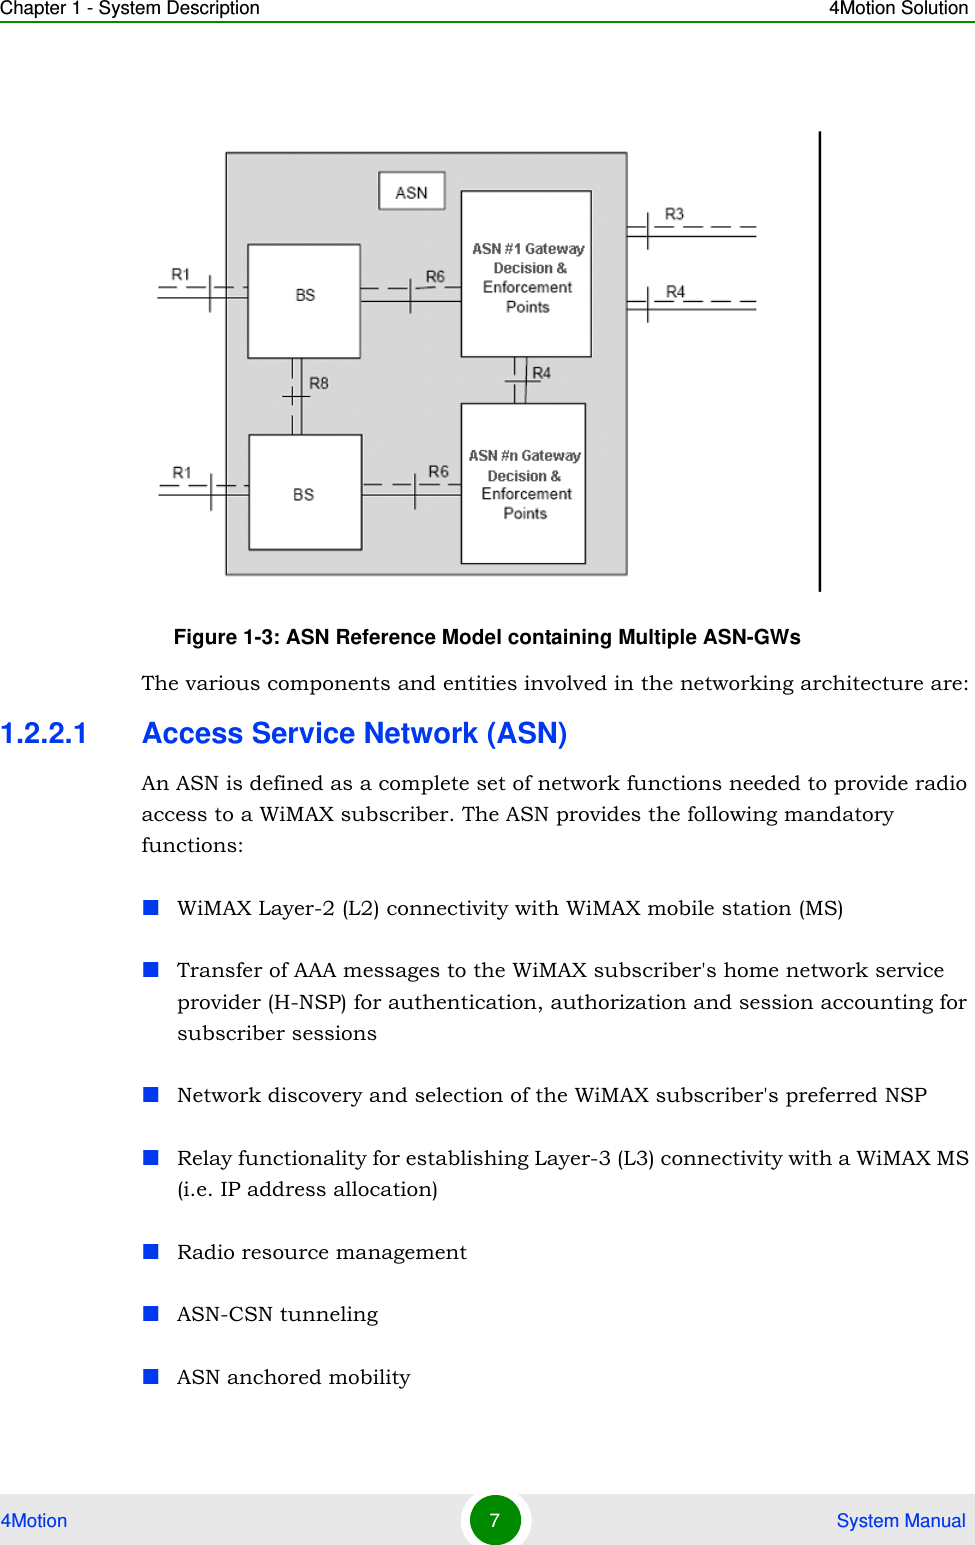 Chapter 1 - System Description 4Motion Solution4Motion 7 System Manual The various components and entities involved in the networking architecture are:1.2.2.1 Access Service Network (ASN)An ASN is defined as a complete set of network functions needed to provide radio access to a WiMAX subscriber. The ASN provides the following mandatory functions:WiMAX Layer-2 (L2) connectivity with WiMAX mobile station (MS) Transfer of AAA messages to the WiMAX subscriber&apos;s home network service provider (H-NSP) for authentication, authorization and session accounting for subscriber sessionsNetwork discovery and selection of the WiMAX subscriber&apos;s preferred NSPRelay functionality for establishing Layer-3 (L3) connectivity with a WiMAX MS (i.e. IP address allocation)Radio resource managementASN-CSN tunnelingASN anchored mobilityFigure 1-3: ASN Reference Model containing Multiple ASN-GWs